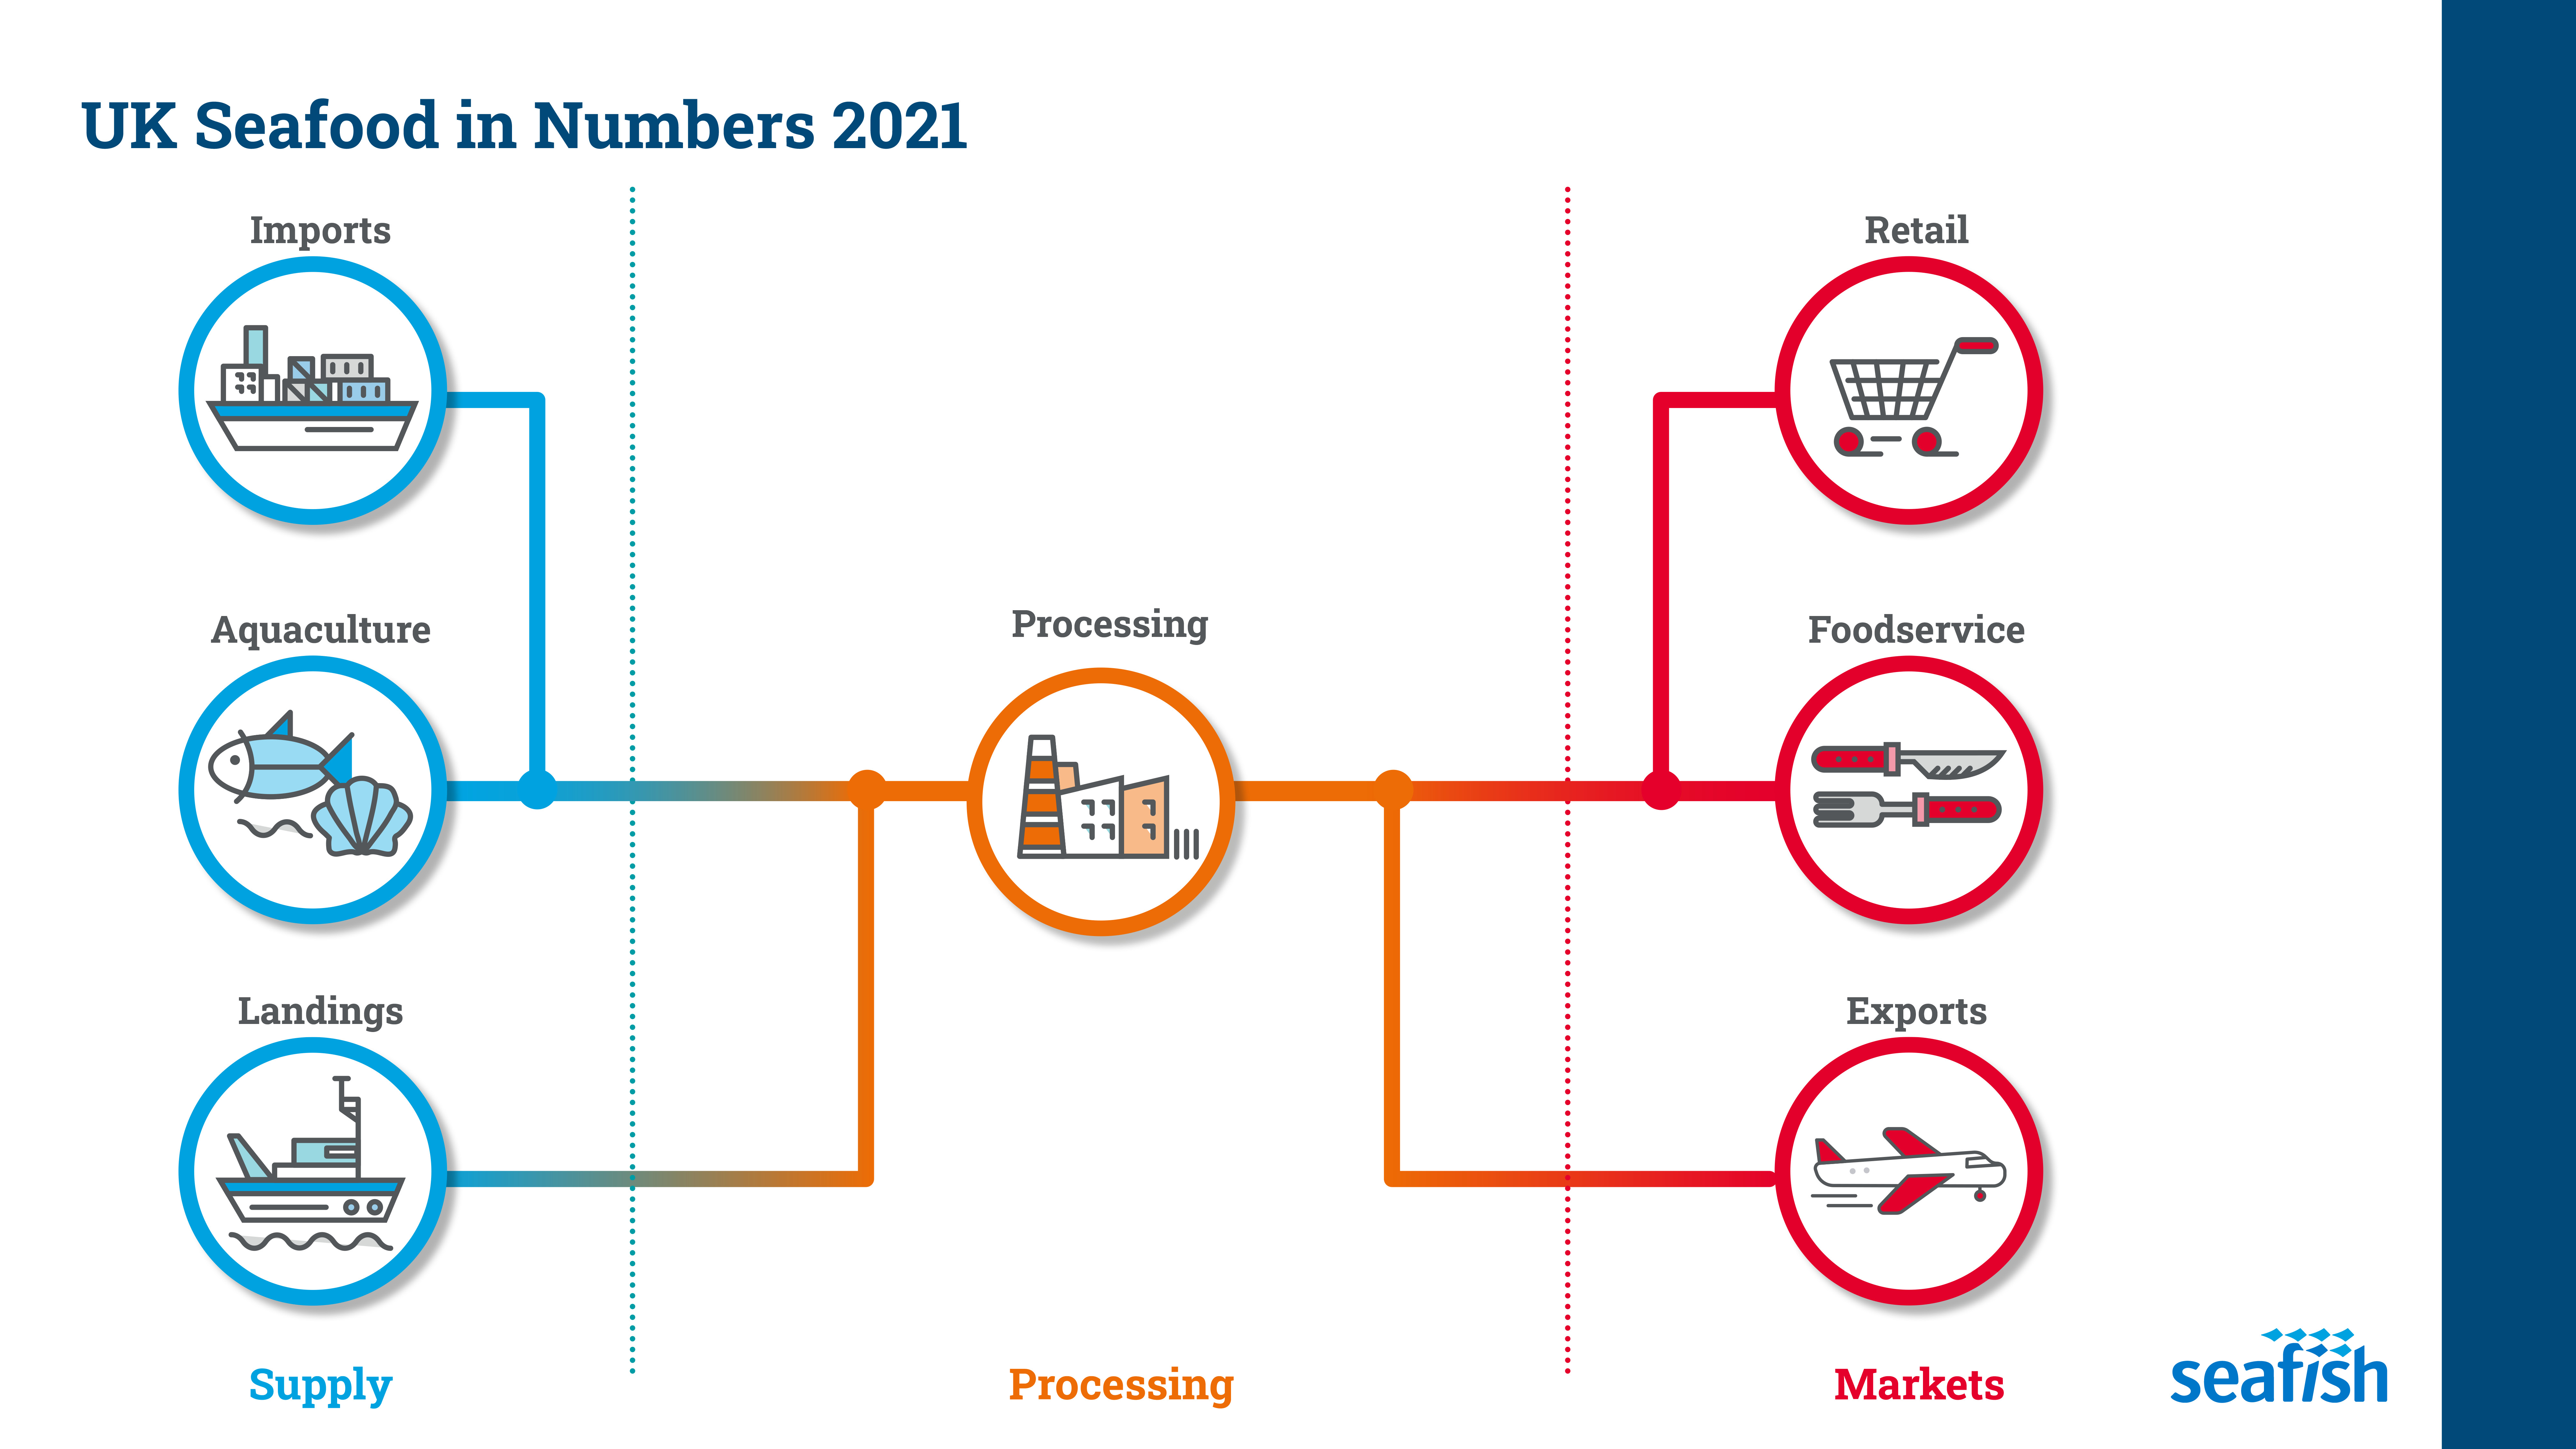 Image of icons from left to right showing seafood supply chain. Text says Landings, Aquaculture, Imports, Processing, Retails, Foodservice and Exports